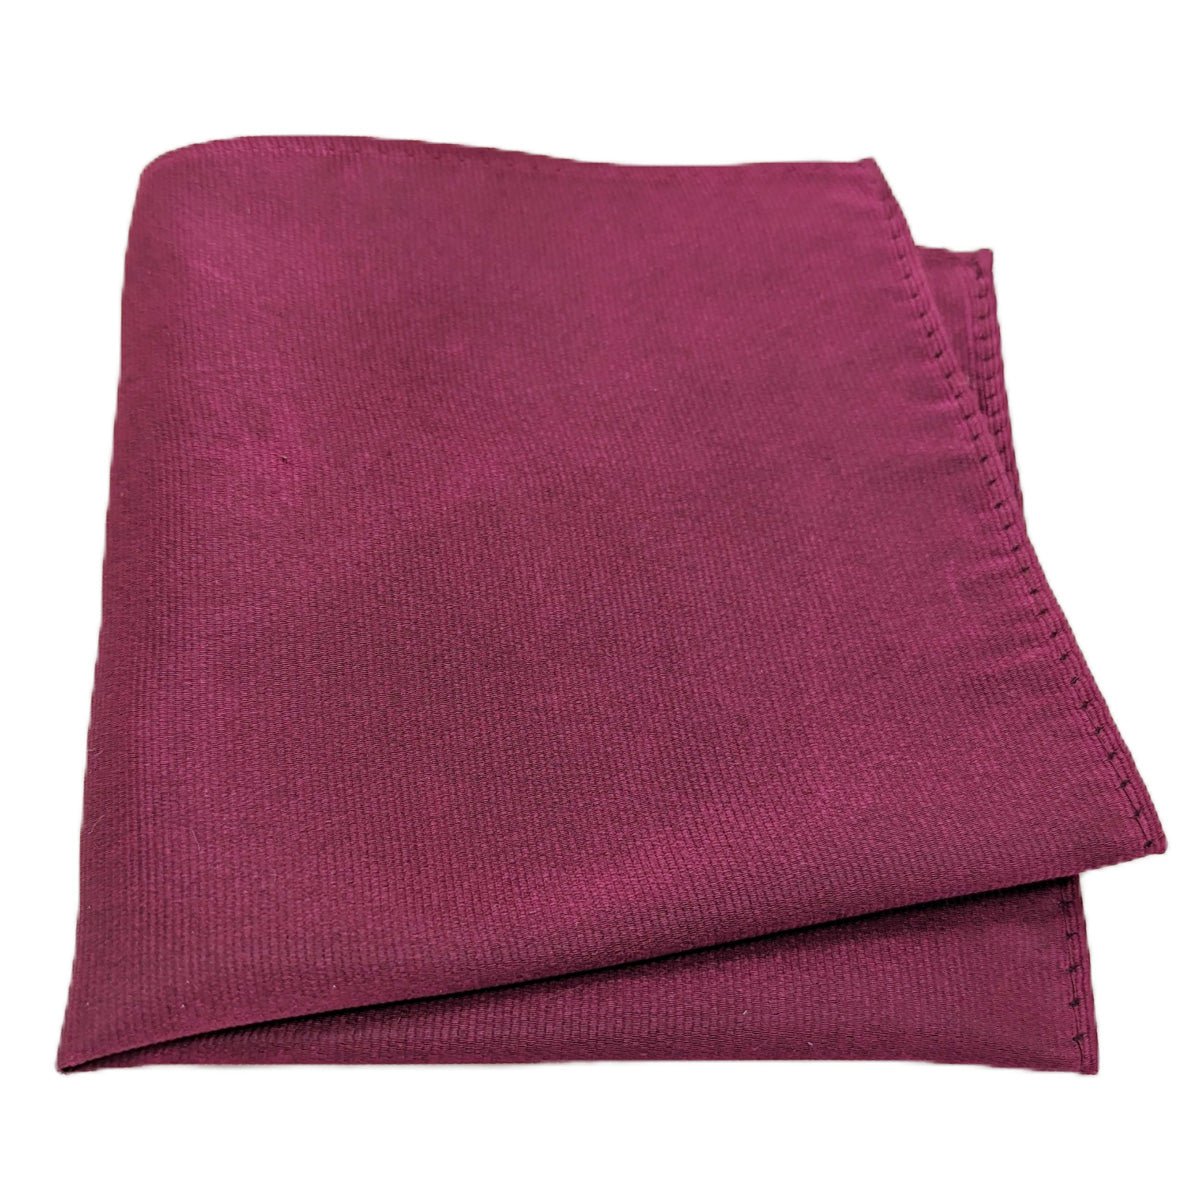 Berry Silk Pocket Square - Wedding Pocket Square - - Swagger & Swoon